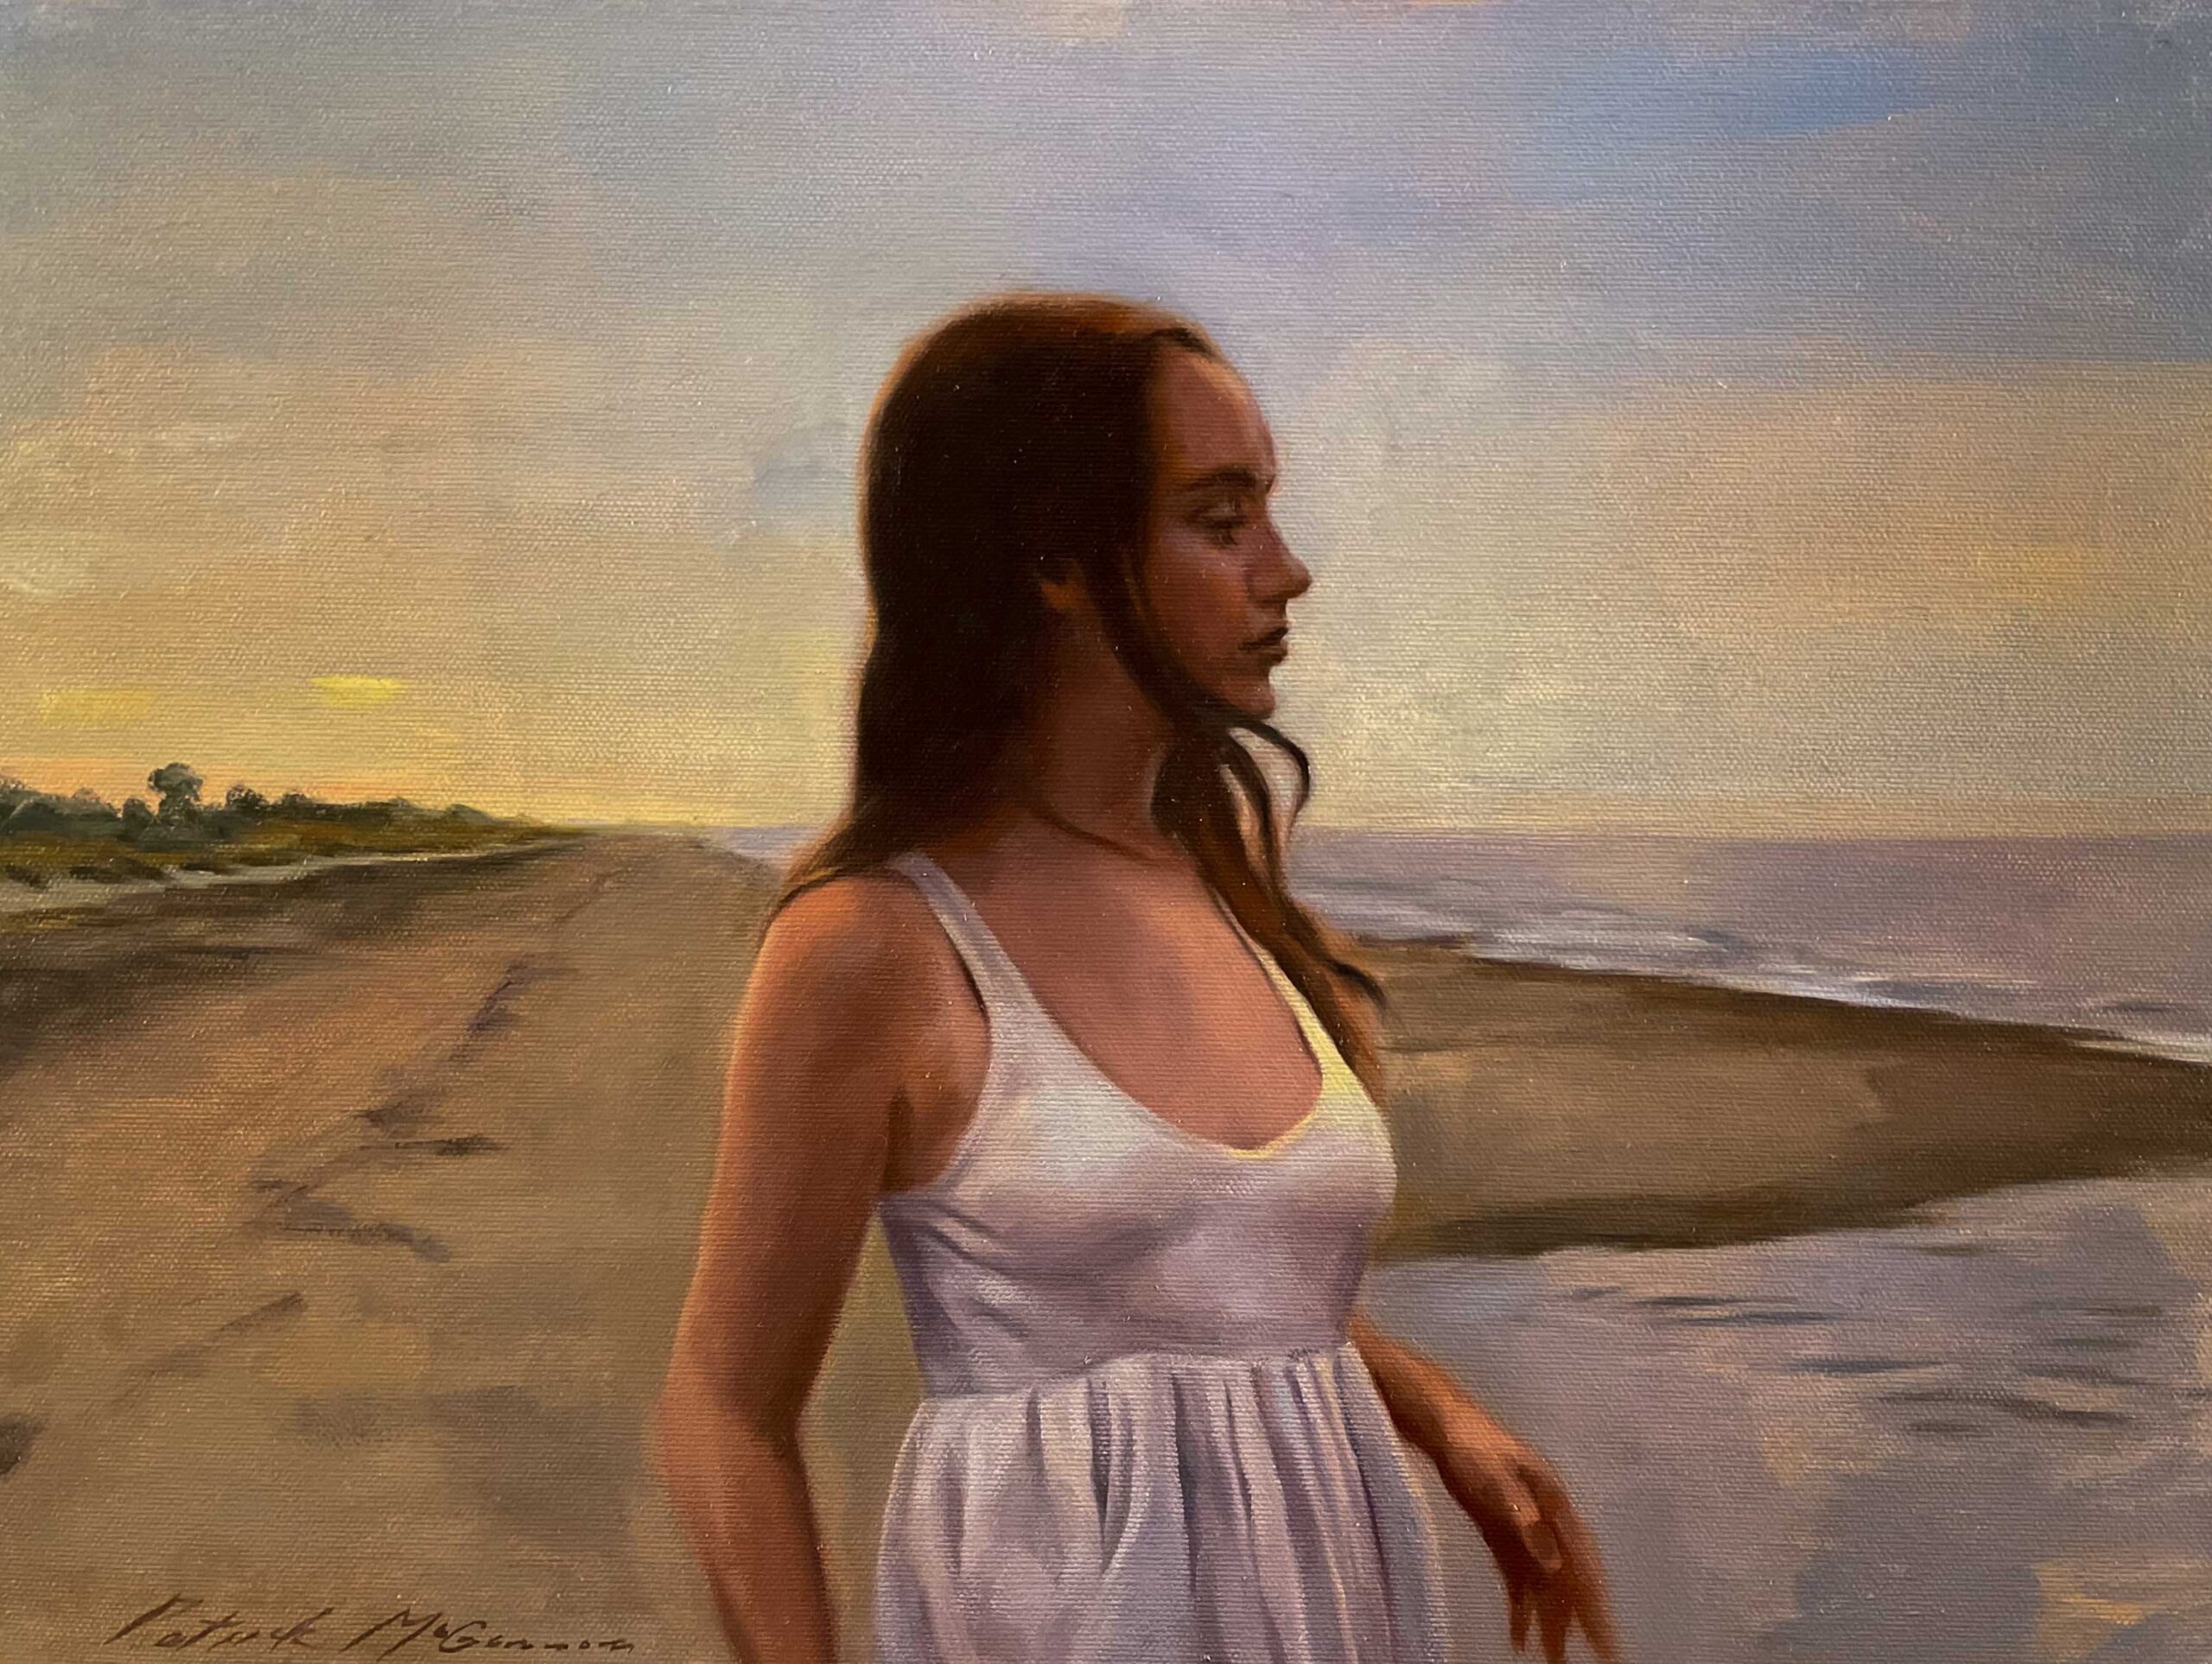 “Fading Light” by Patrick McGannon, 2022, oil, 12 x 16 in., Available from artist, Studio from plein air study